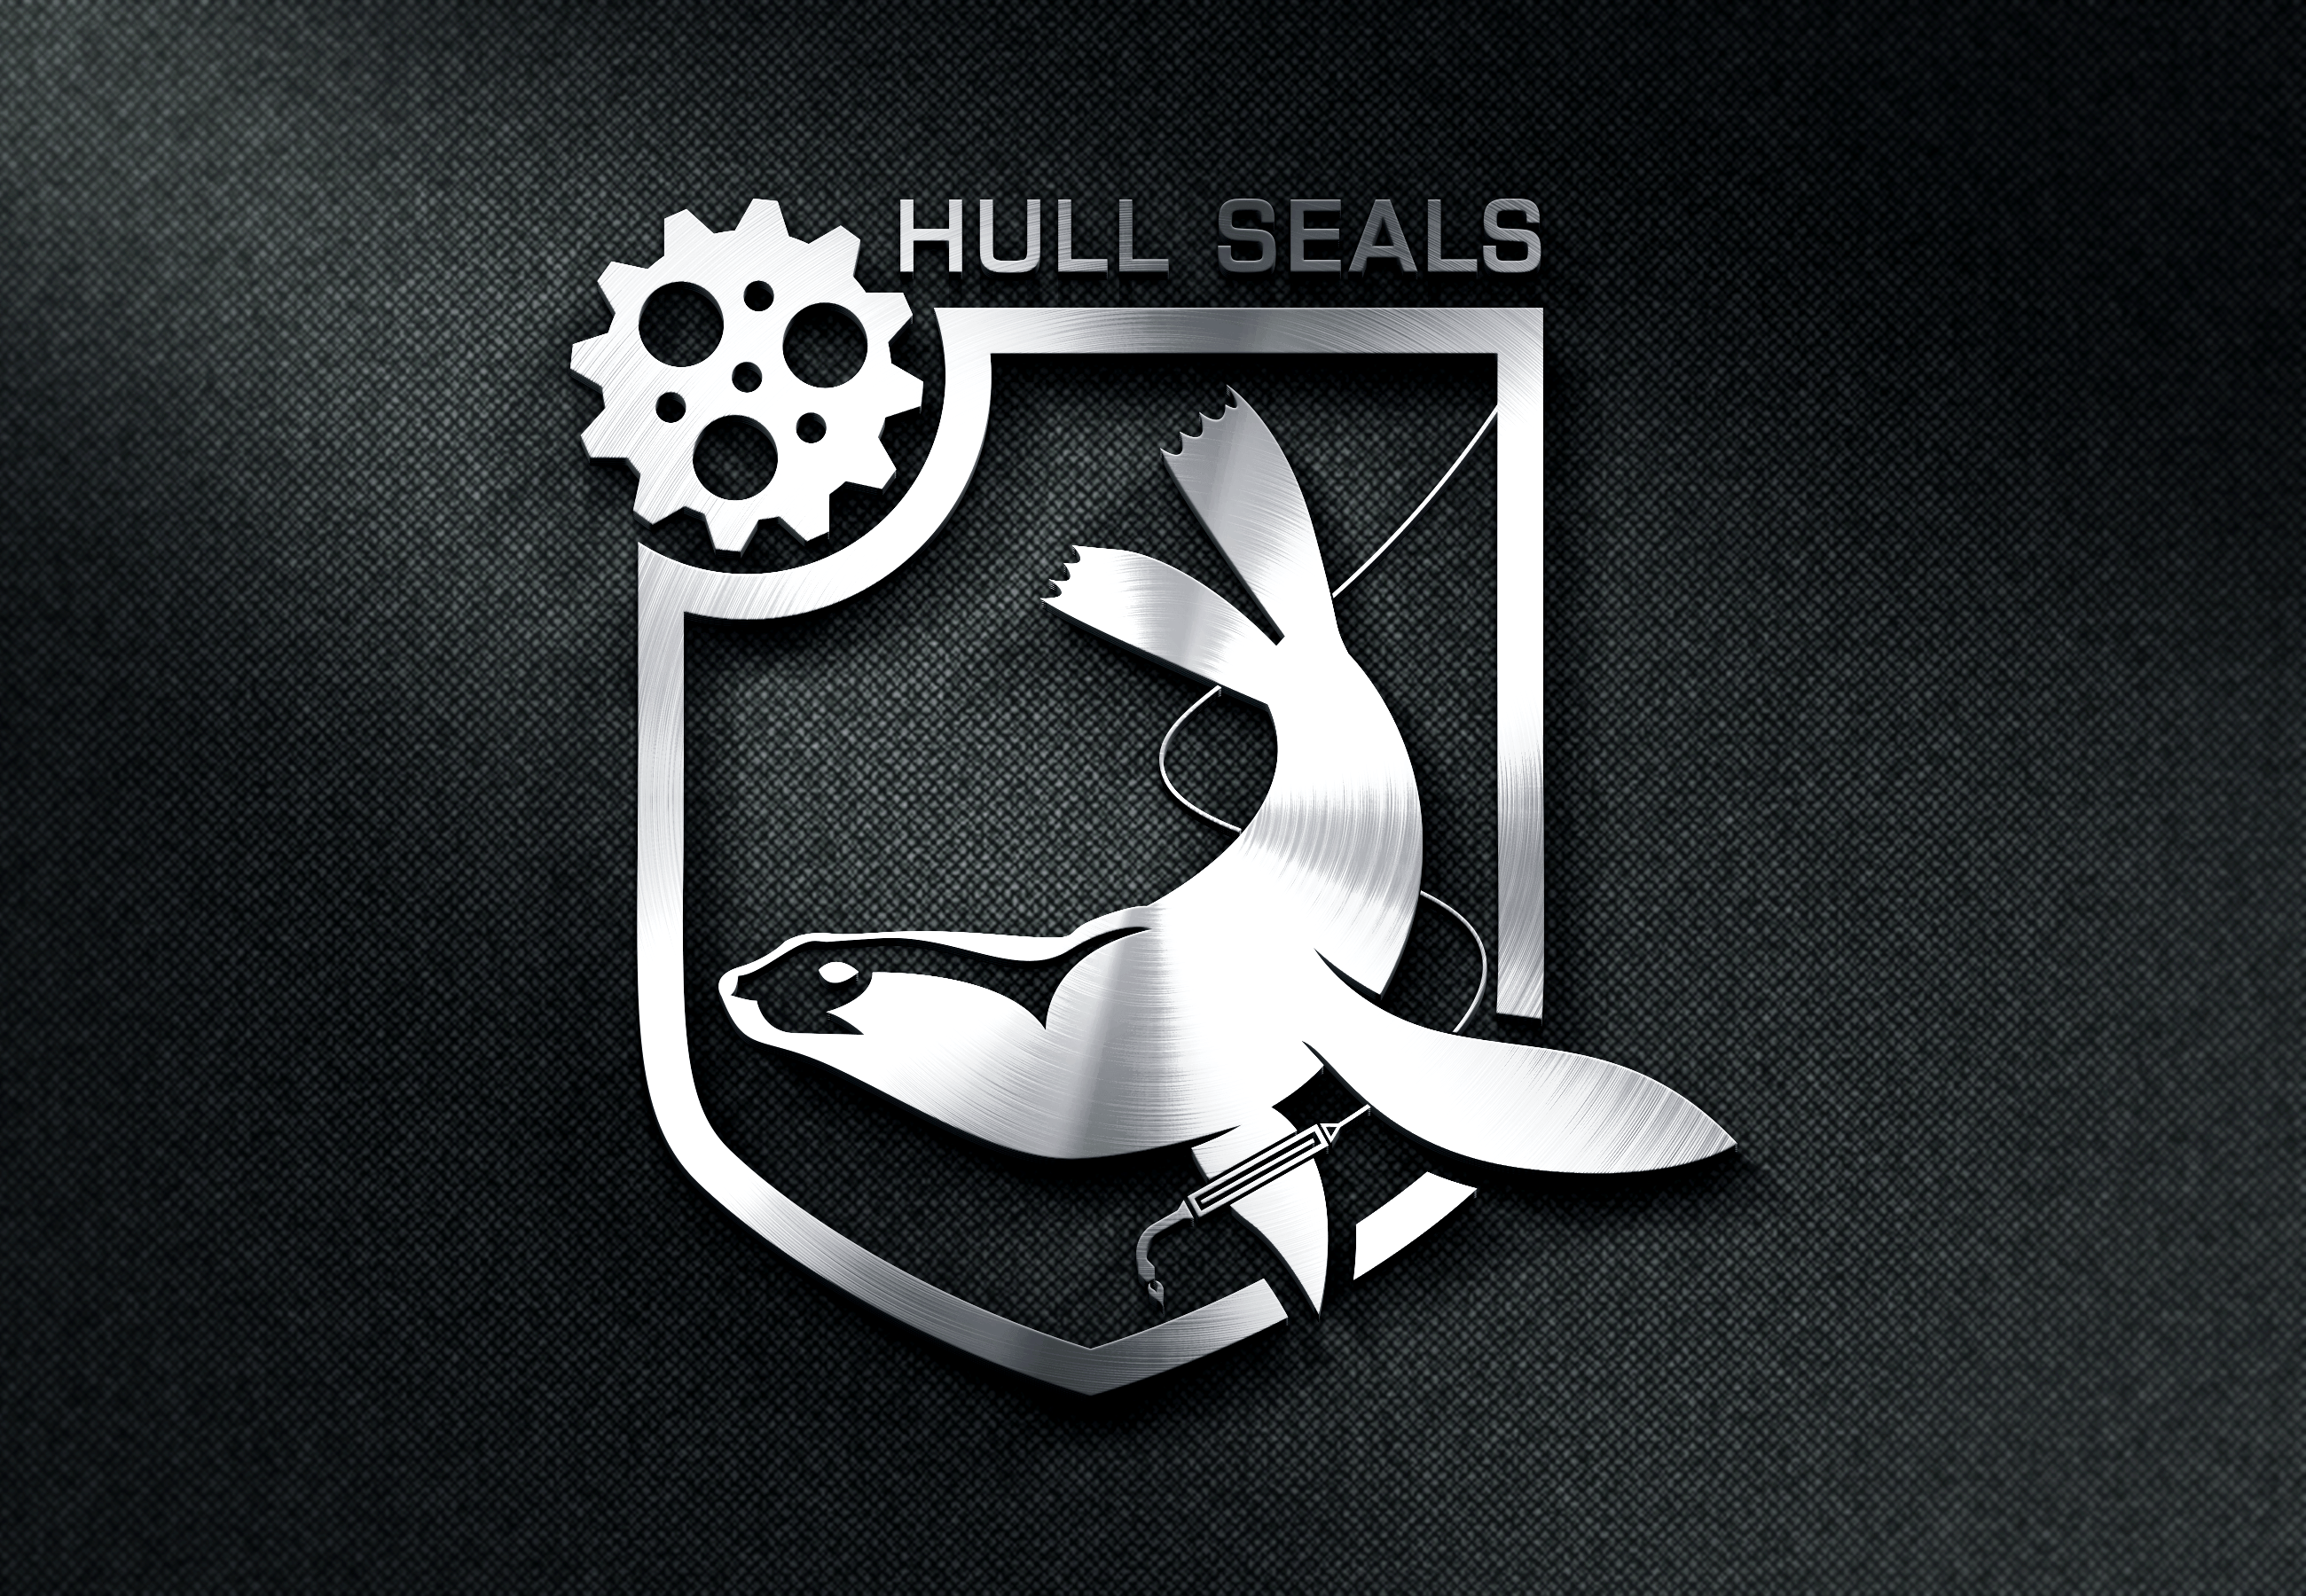 Seals Logo - My proposed logo for 'The Hull Seals' fleet mechanics group ...